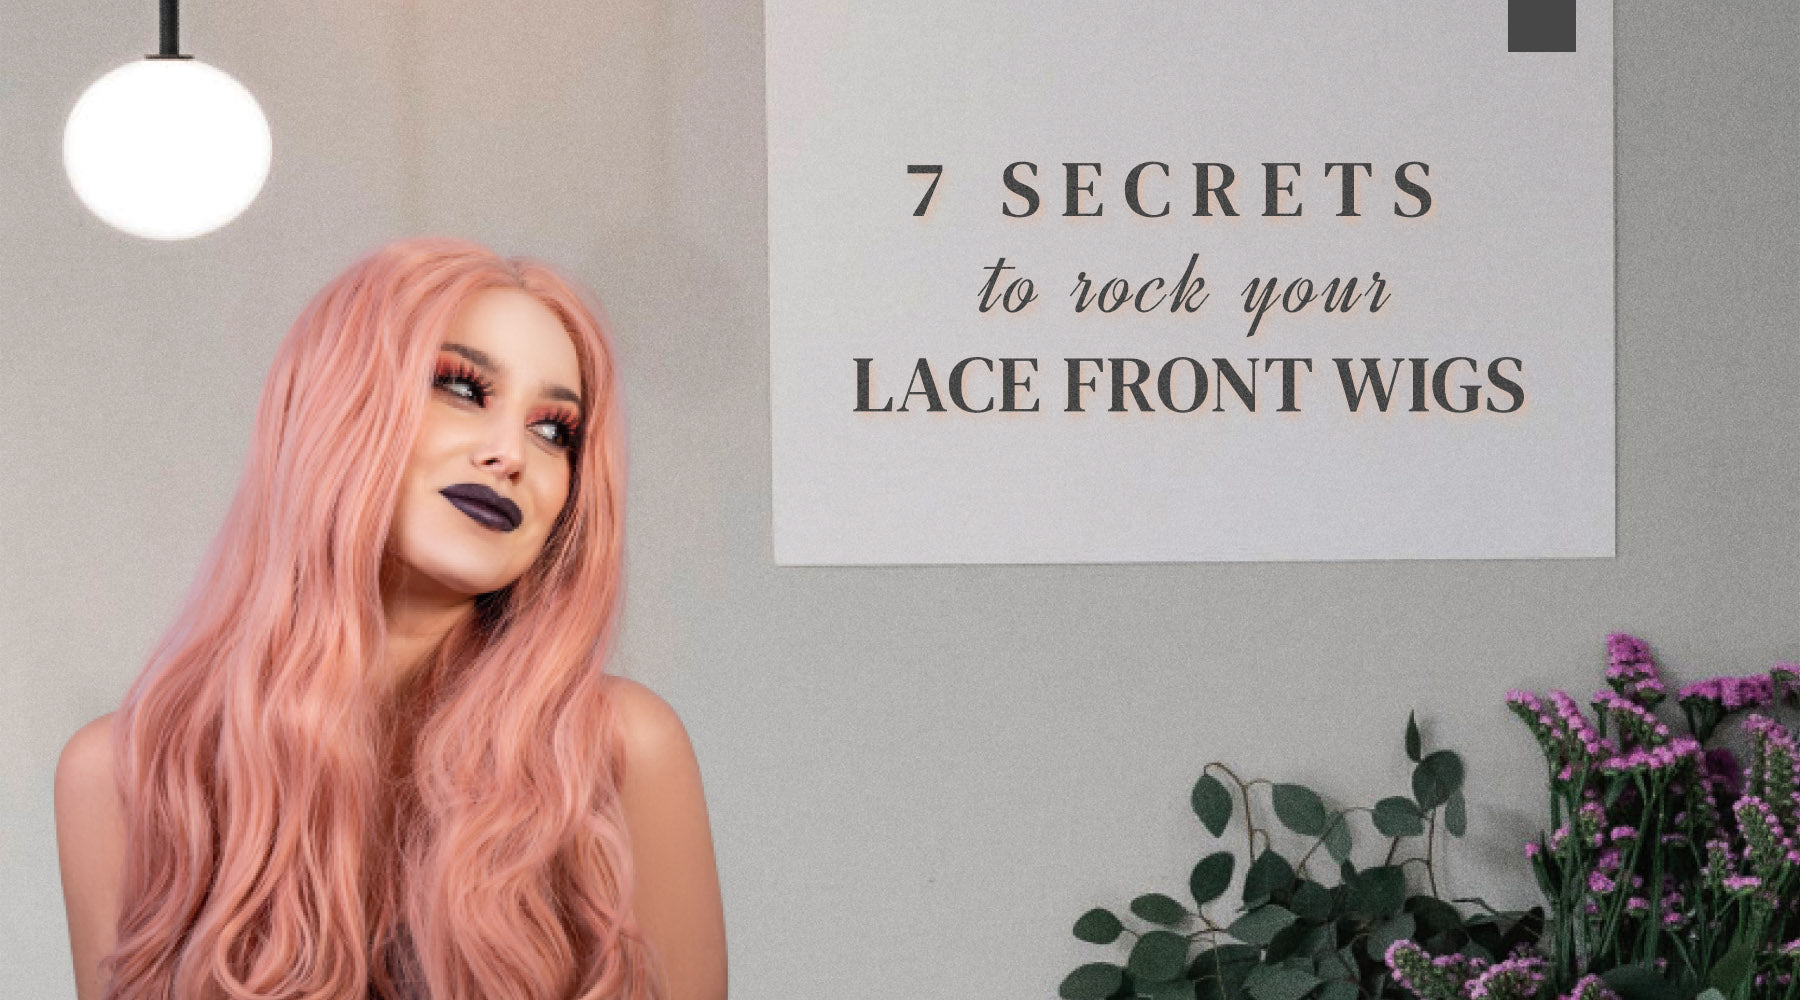 7 Simple Secrets to Rock with Your Lace Front Wigs